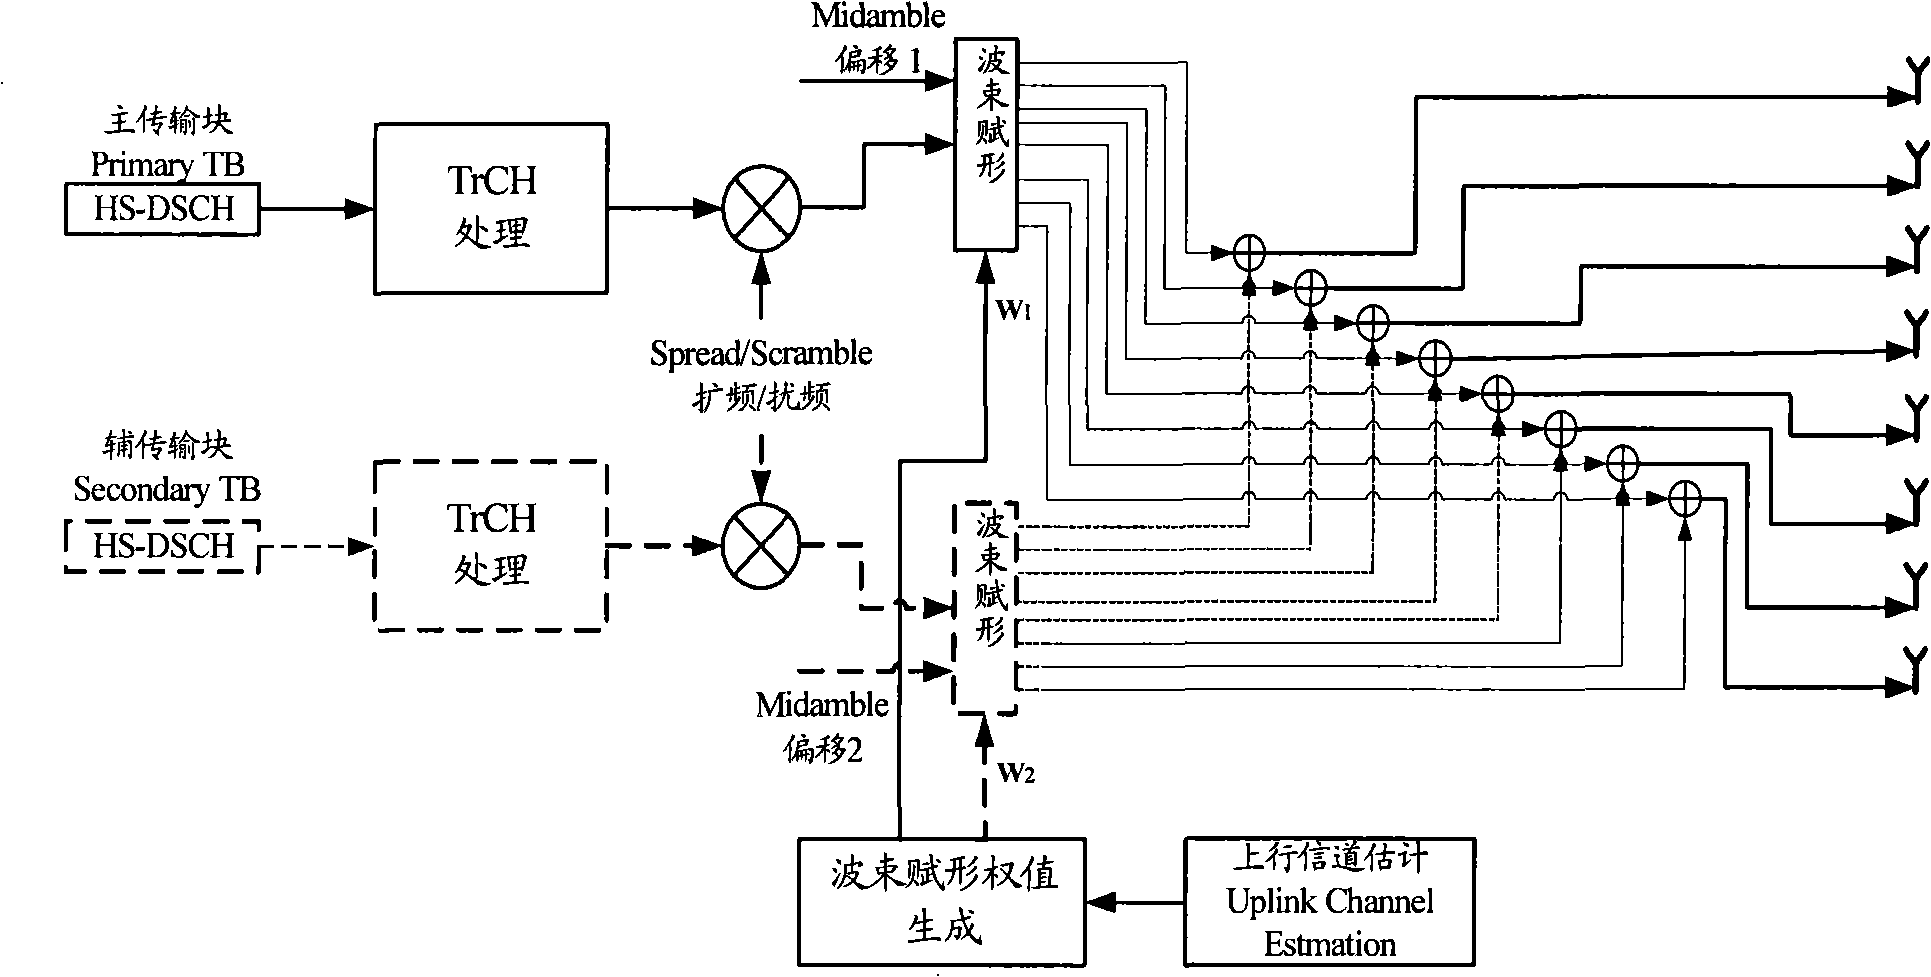 Method for applying MIMO technique in TD-SCDMA system outdoor macrocell